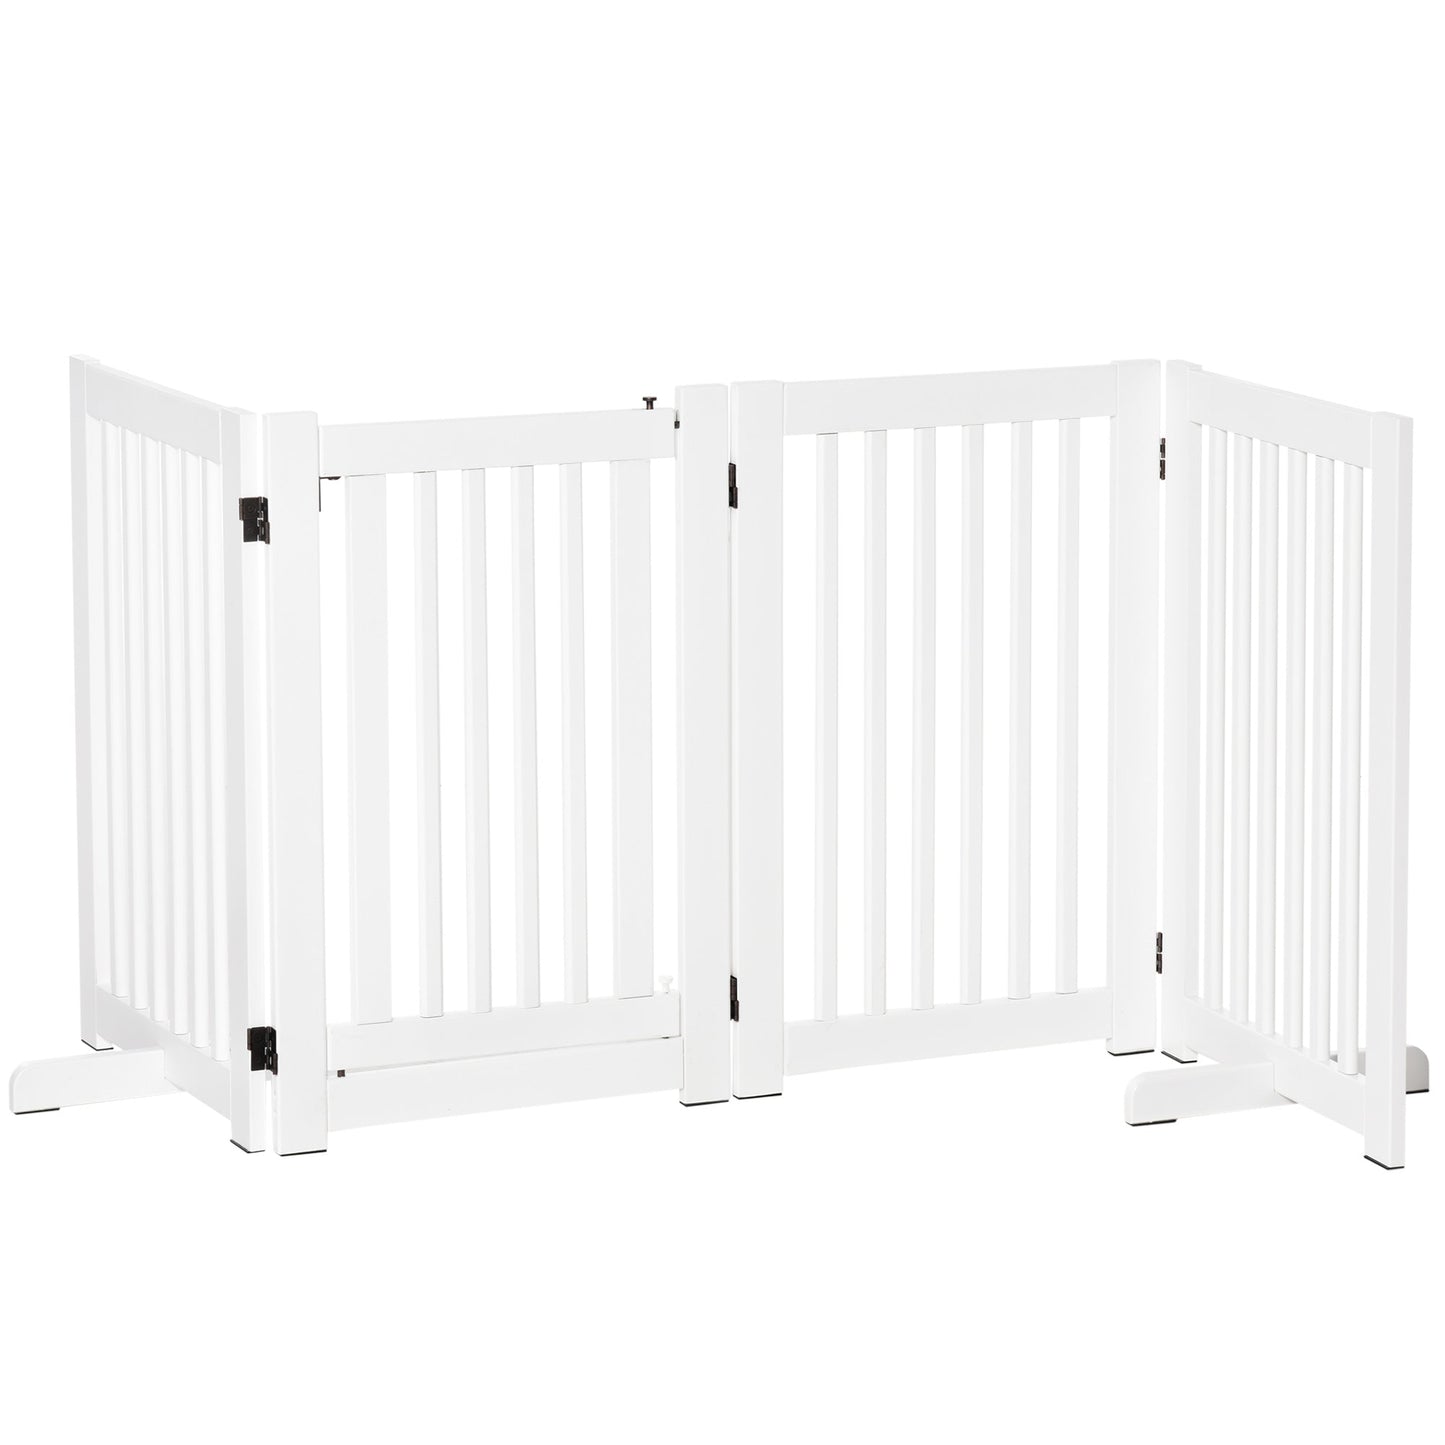 Free Standing Wooden Pet Gate Indoor Dog Barrier Foldable Step Over Doorway Fence Safety Gate with Open Door Z Shape 4 Panel at Gallery Canada